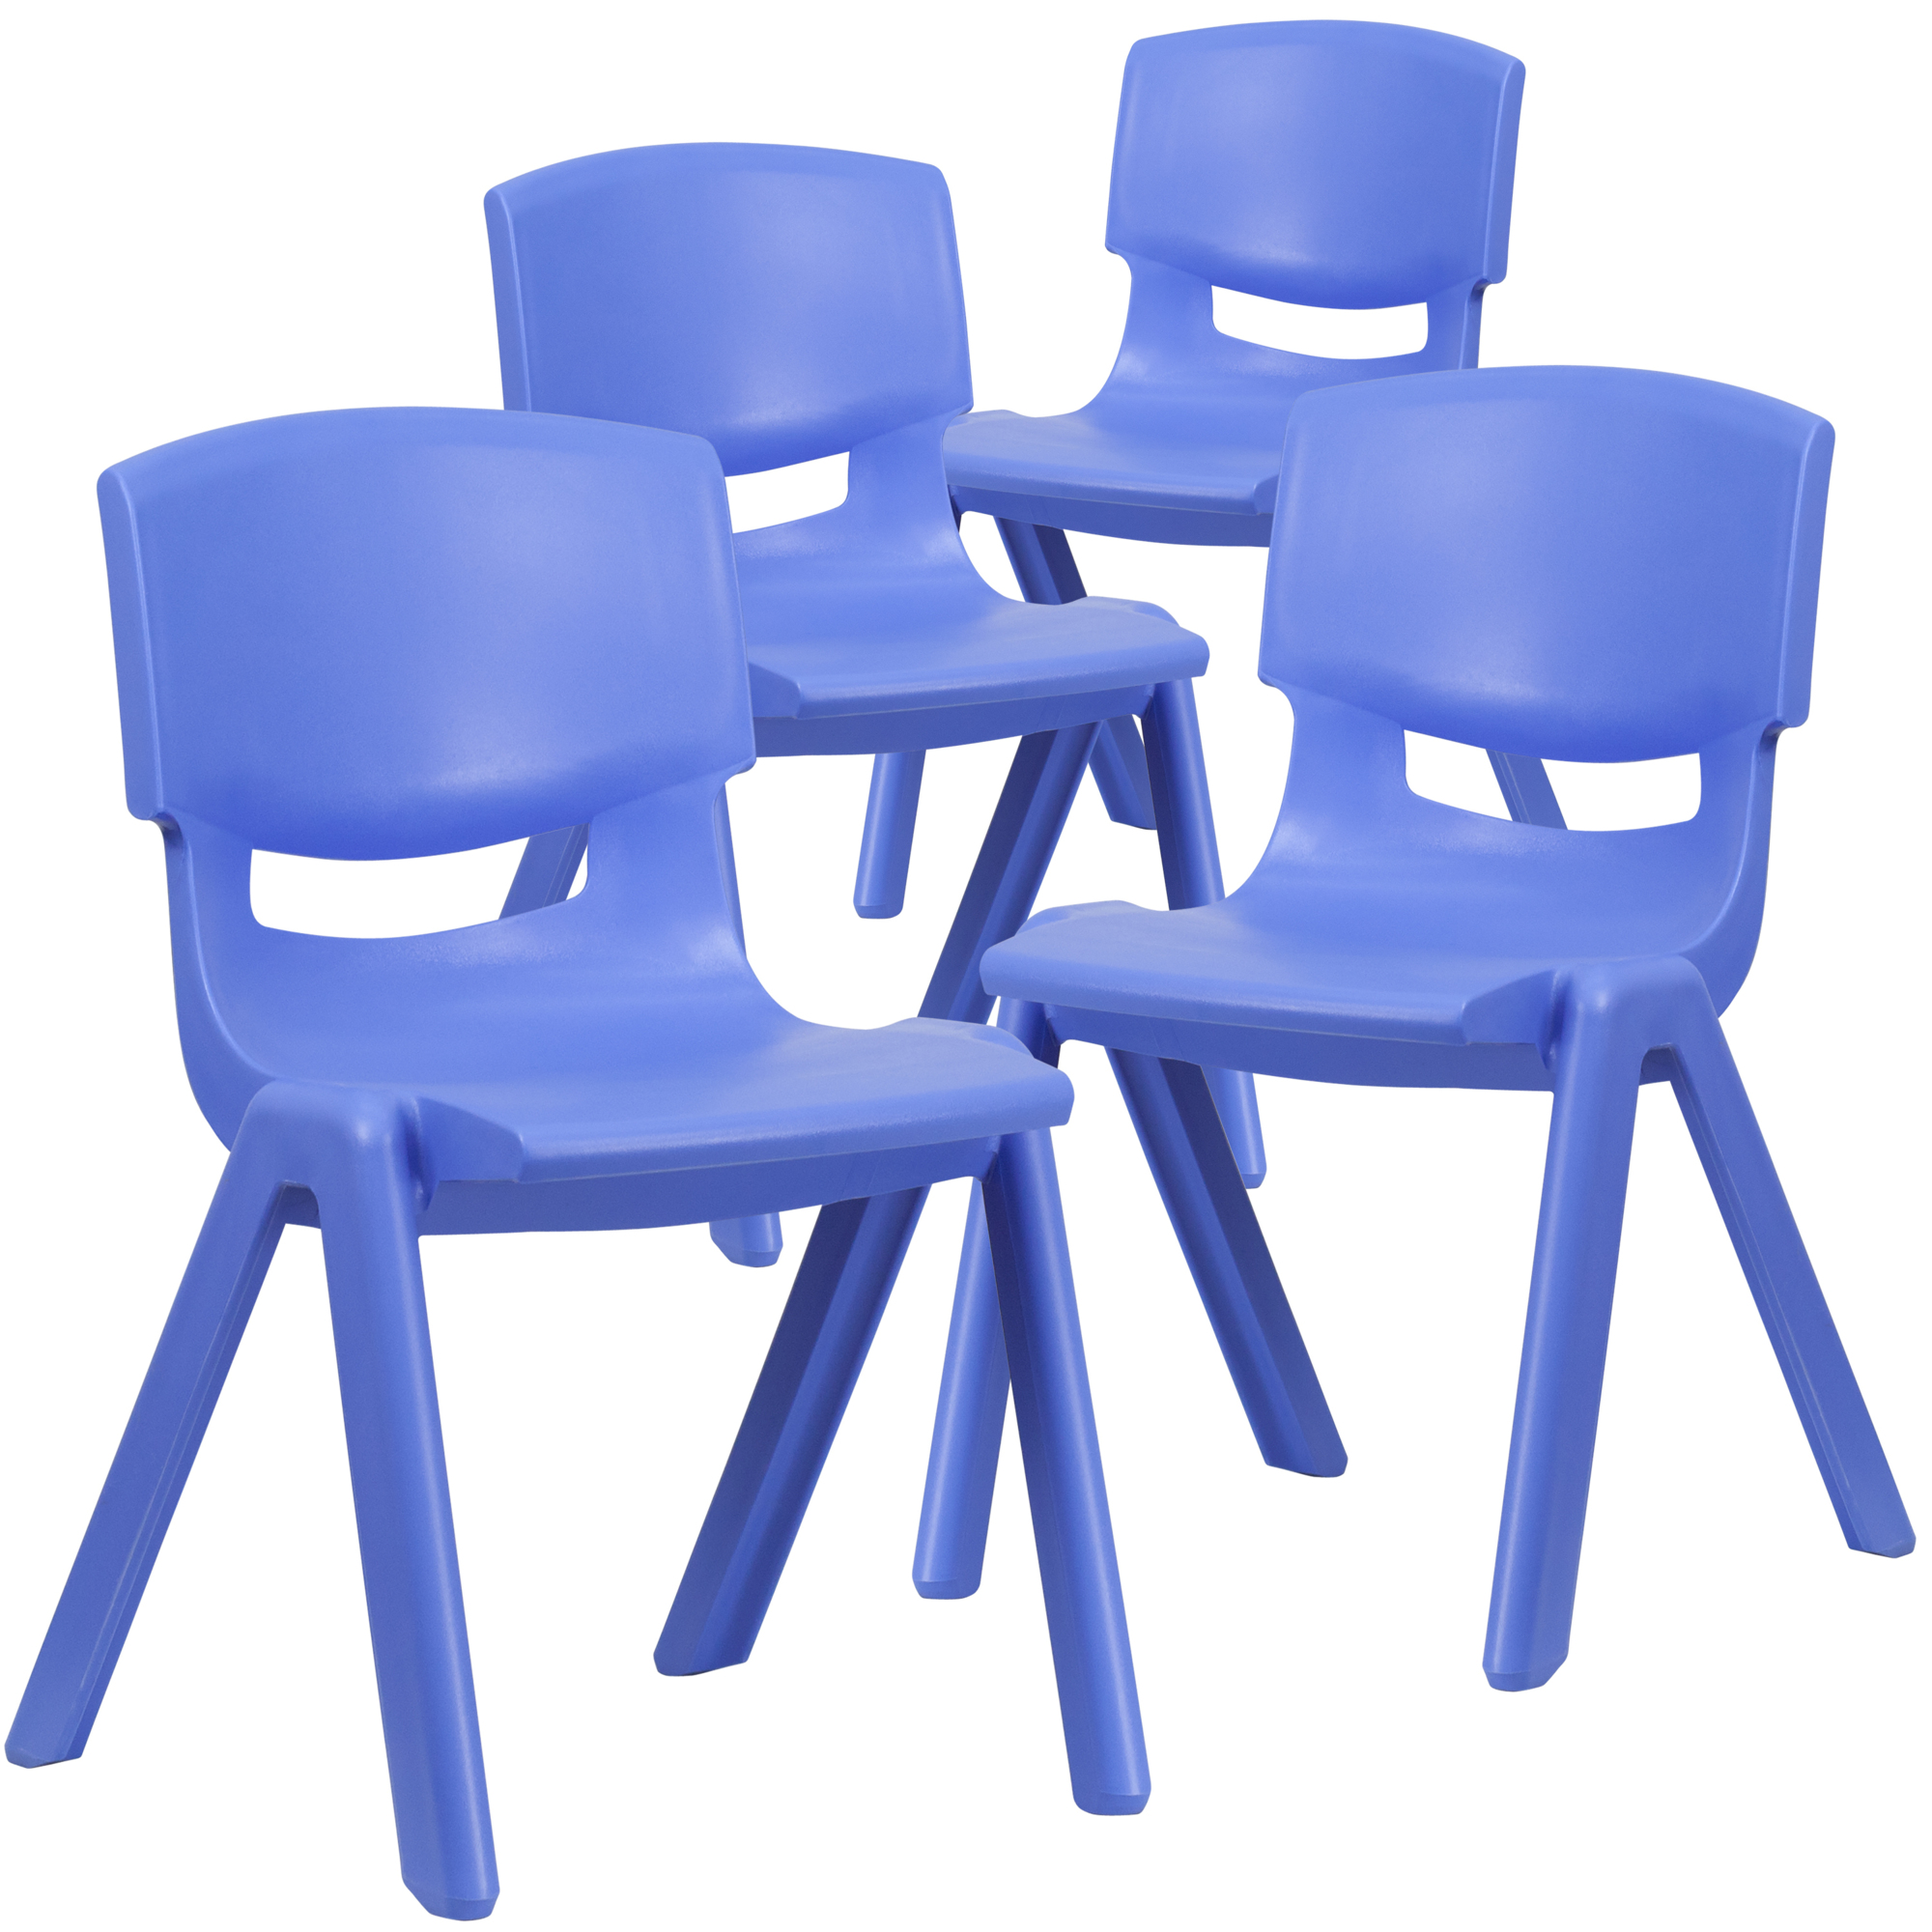 Flash Furniture, 4 Pack Blue Plastic School Chair-15.5Inch H Seat, Primary Color Blue, Included (qty.) 4, Model 4YUYCX4005BLUE